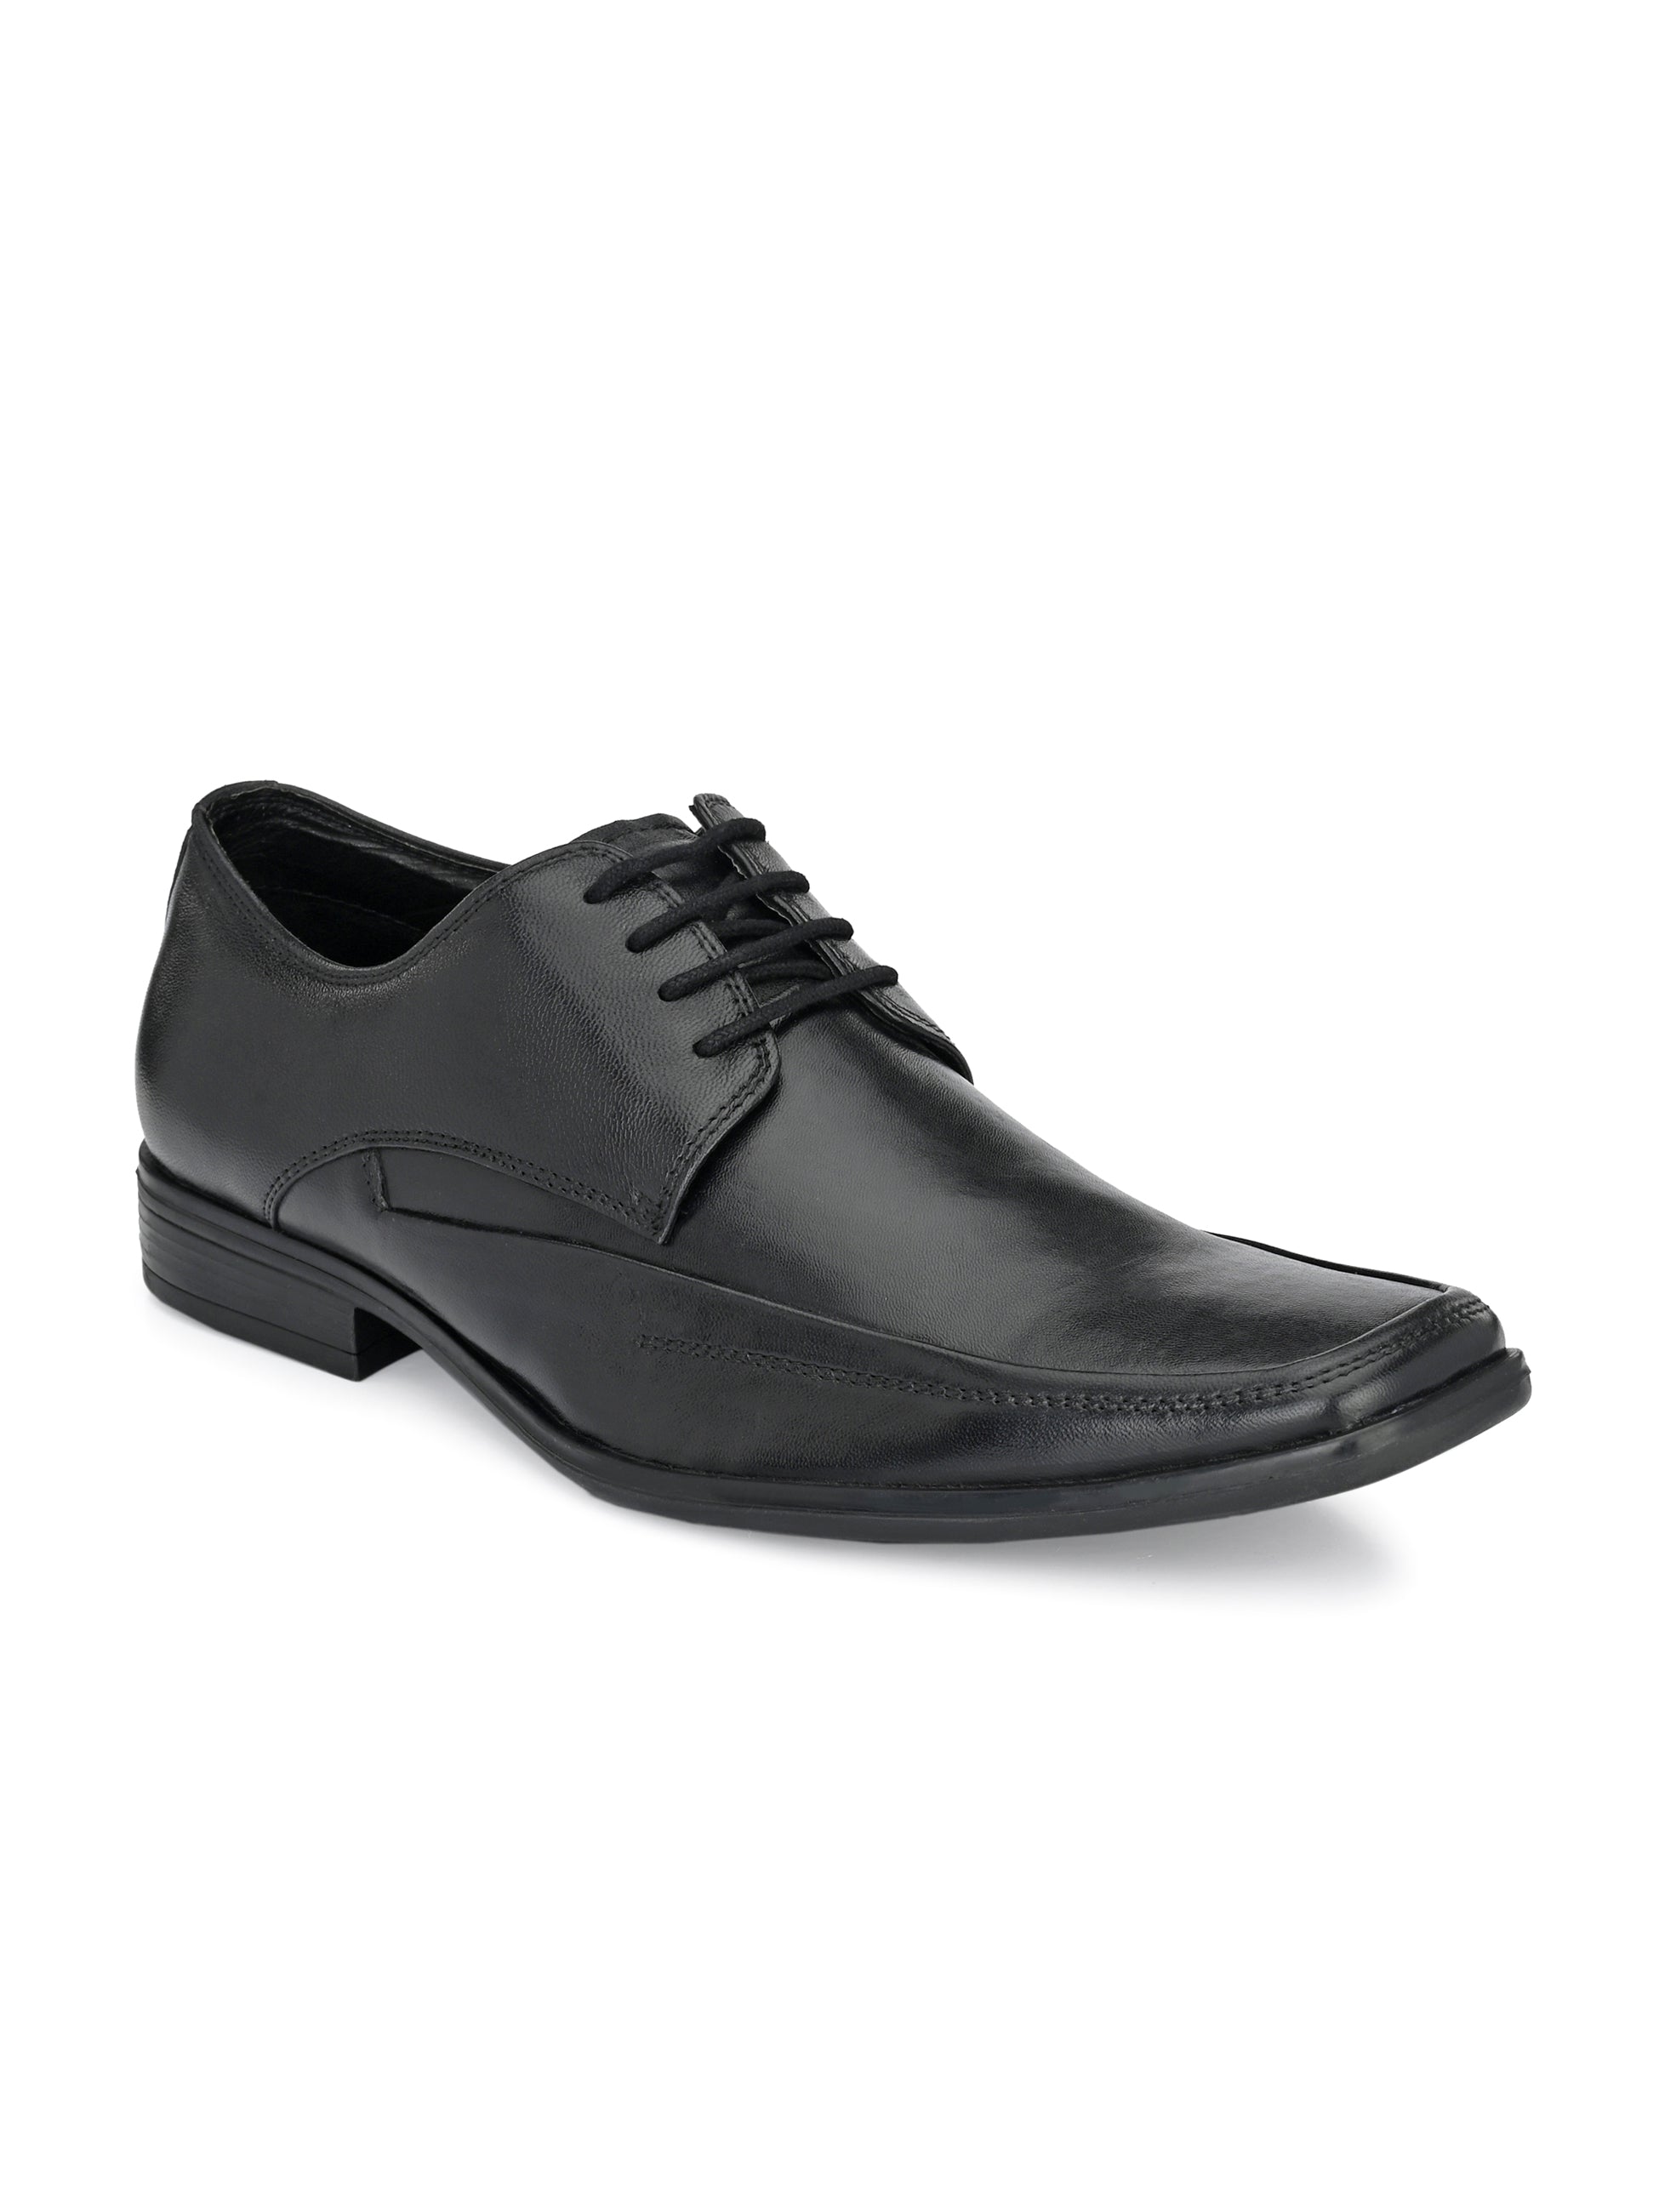 Buy FAUSTO Leather Lace Up Men's Formal Shoes | Shoppers Stop